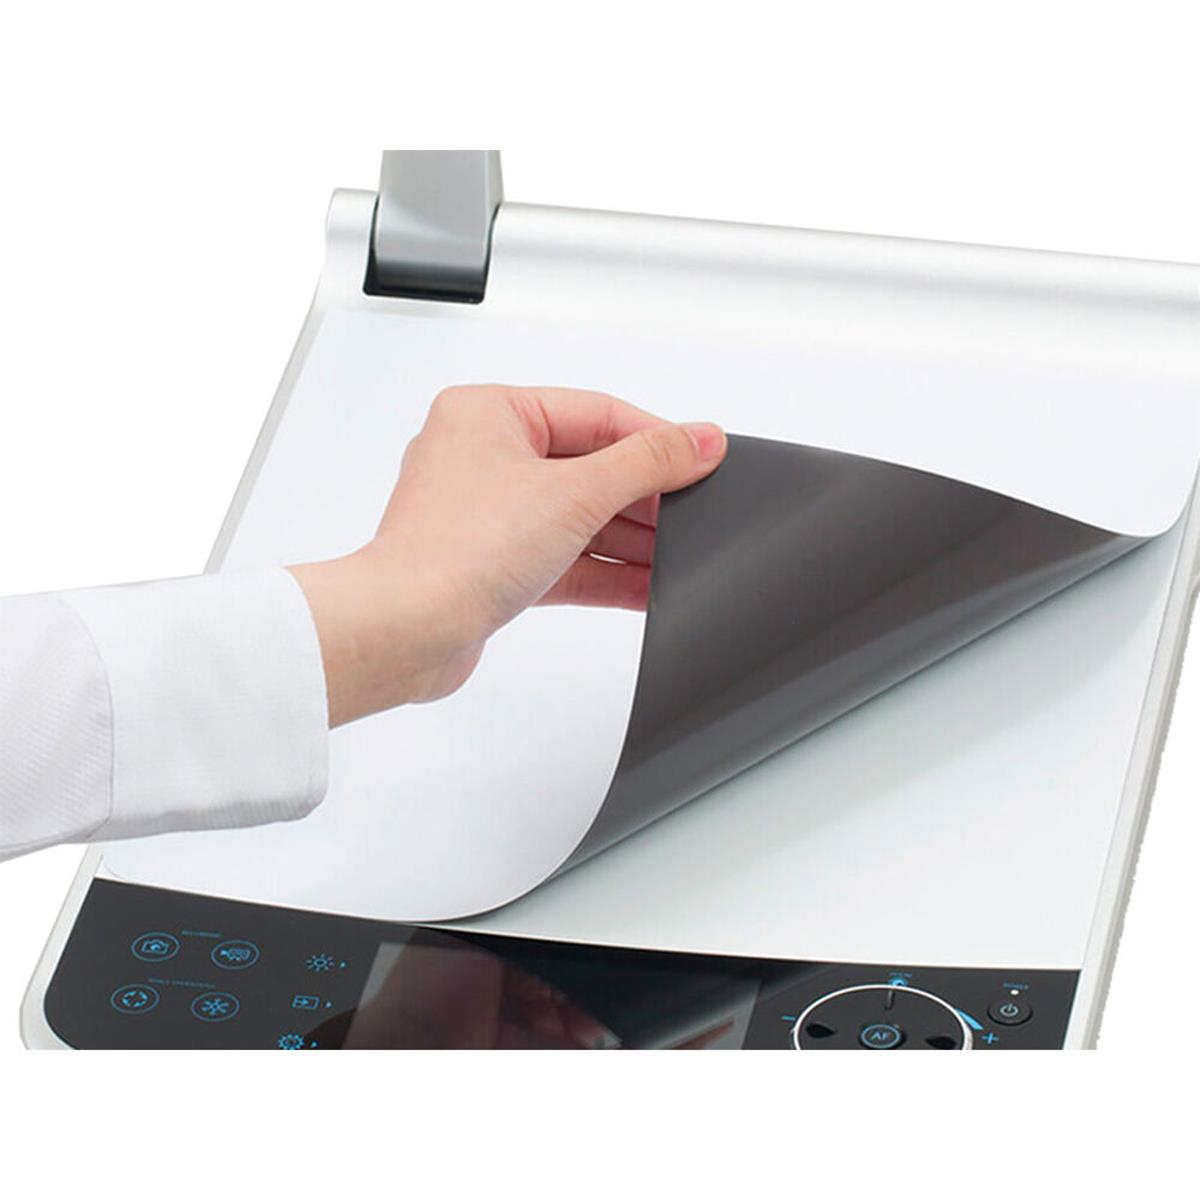 Image of Elmo Dry Erase Magnet Sheet for PX-10 and PX-30 Document Camera